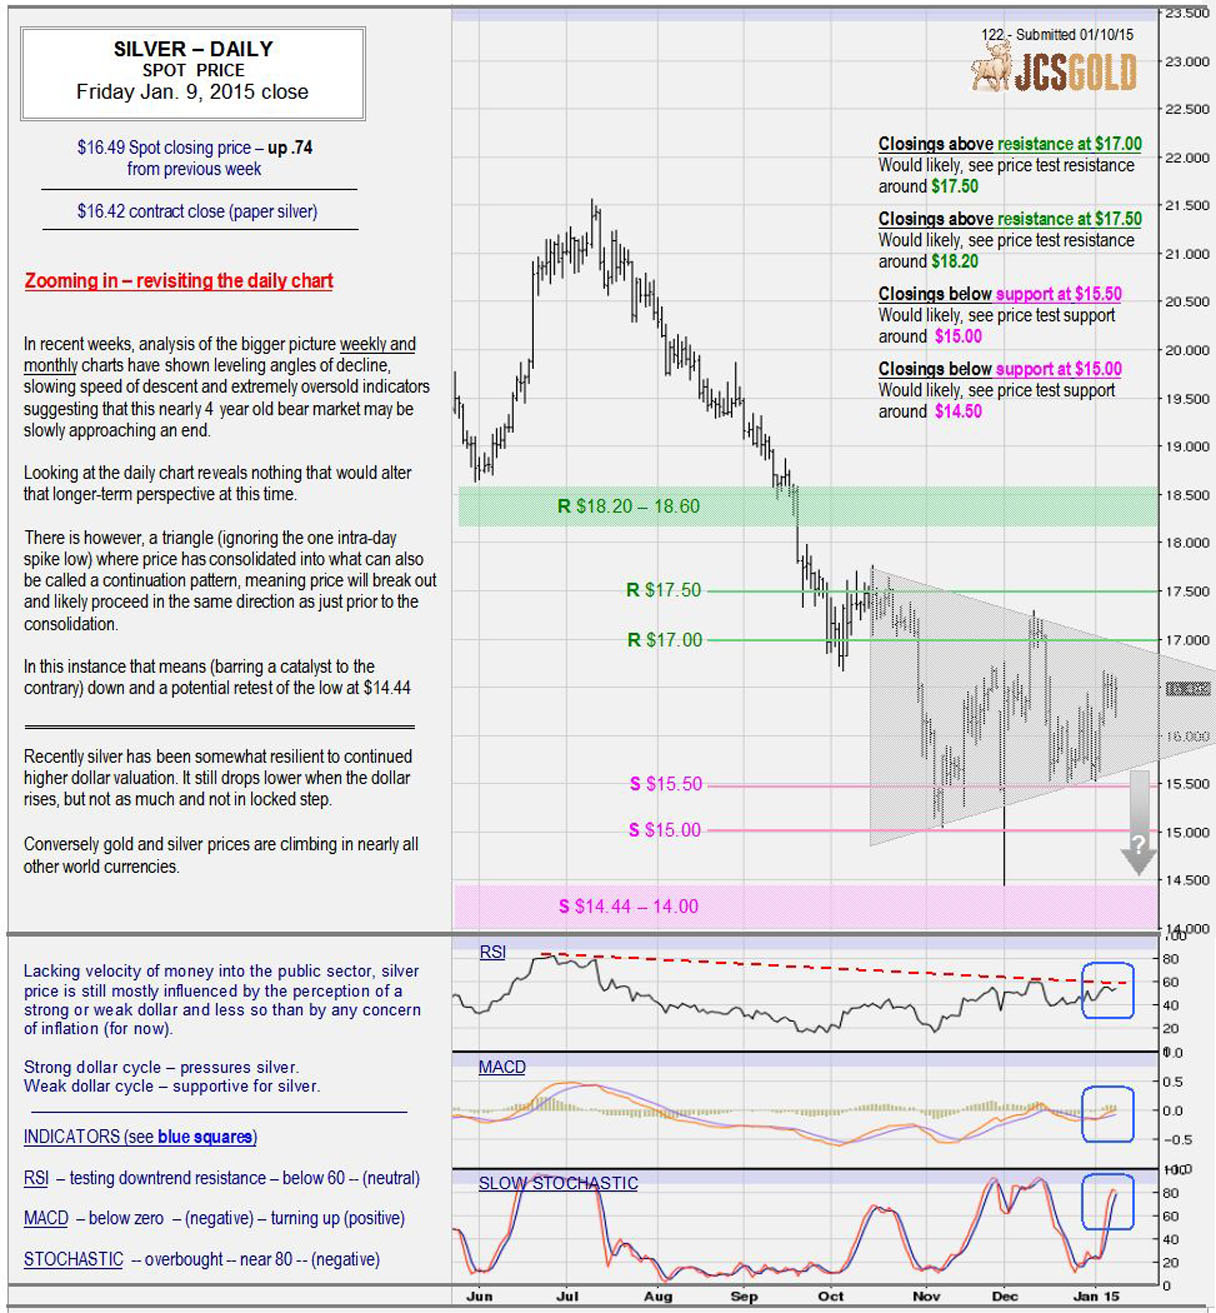 Jan 9, 2015 chart & commentary